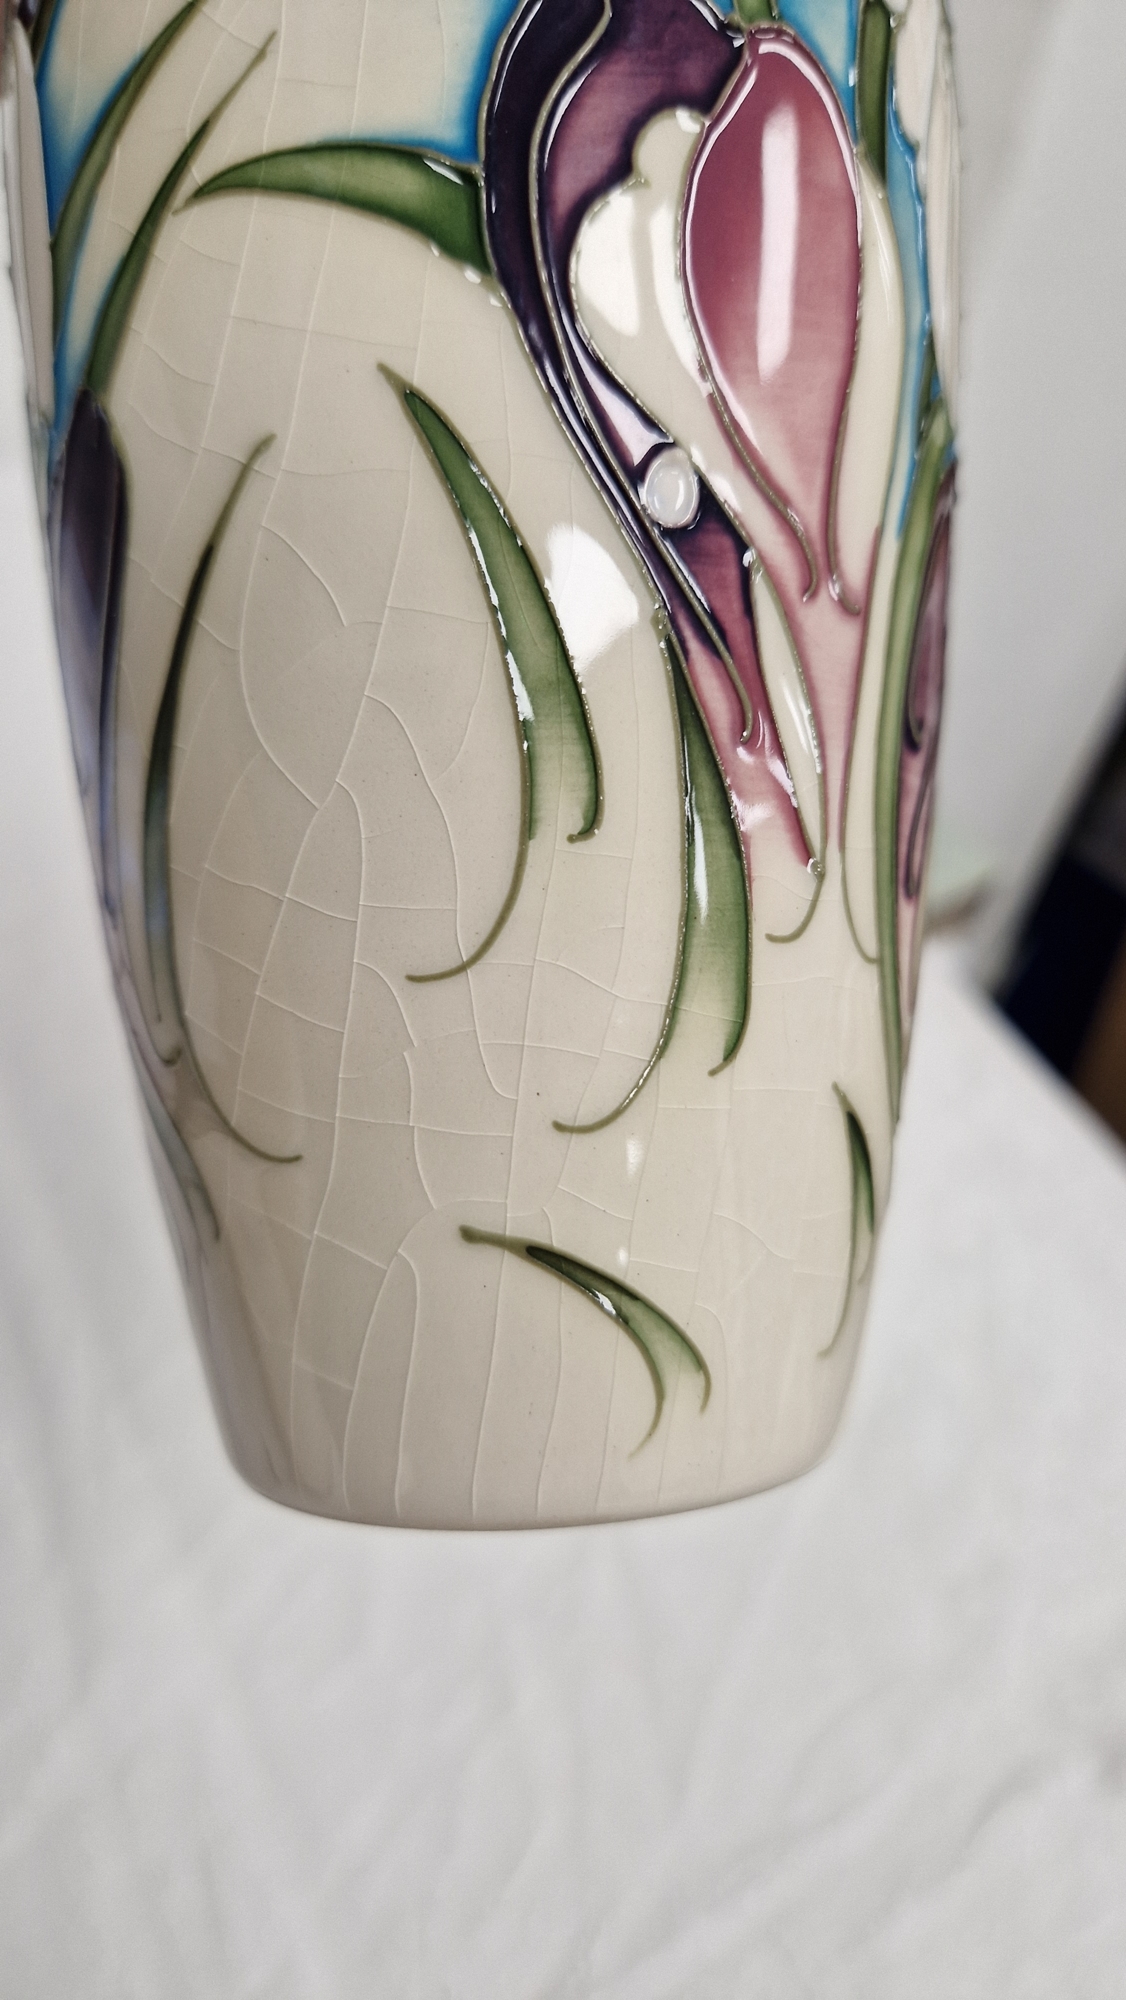 Moorcroft Snow Time pattern tapered baluster vase by Emma Bossons, printed and impressed marks, - Image 4 of 22